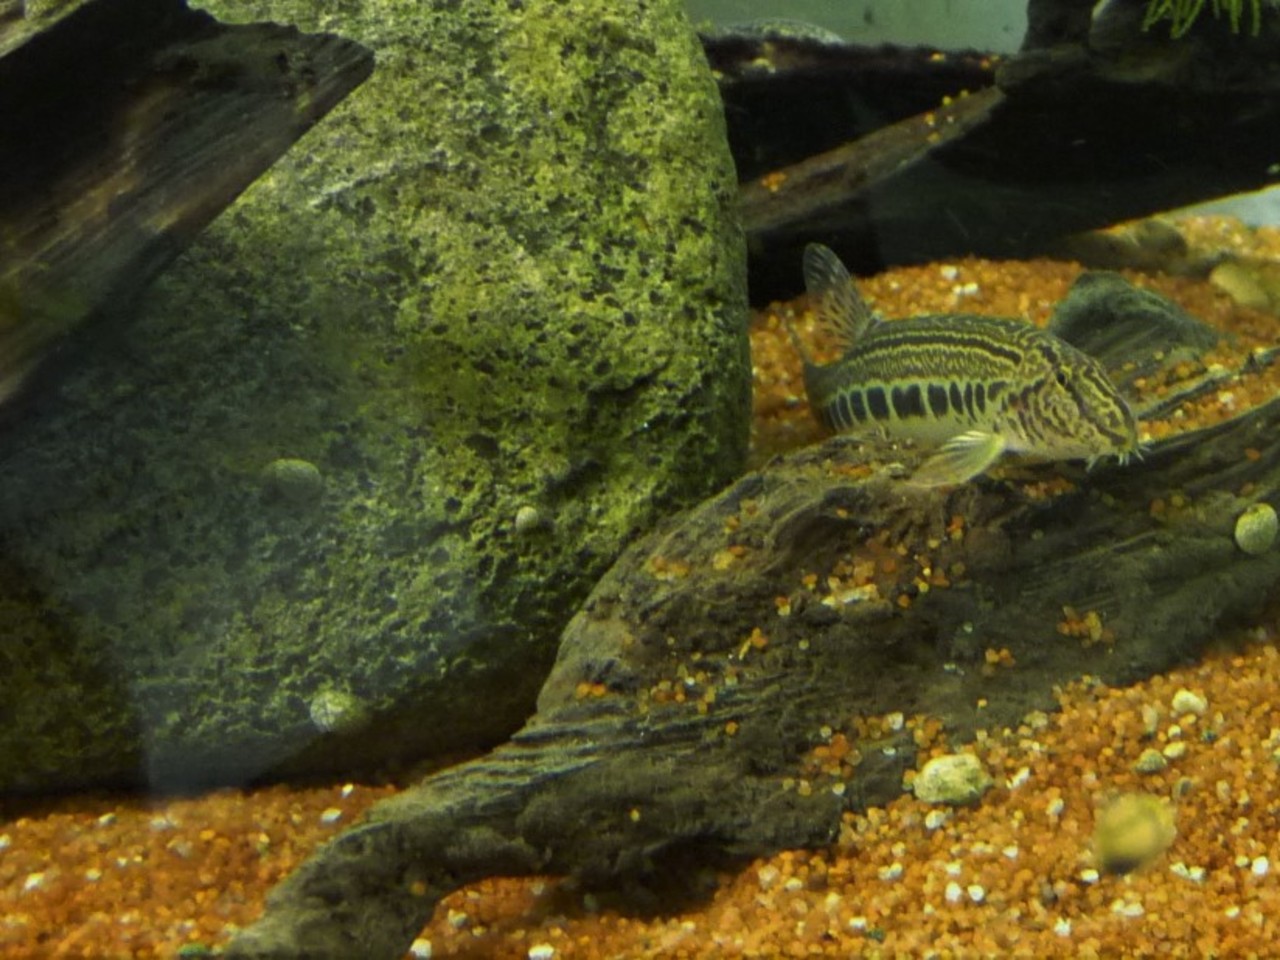 Spined loach Cobitis taenia